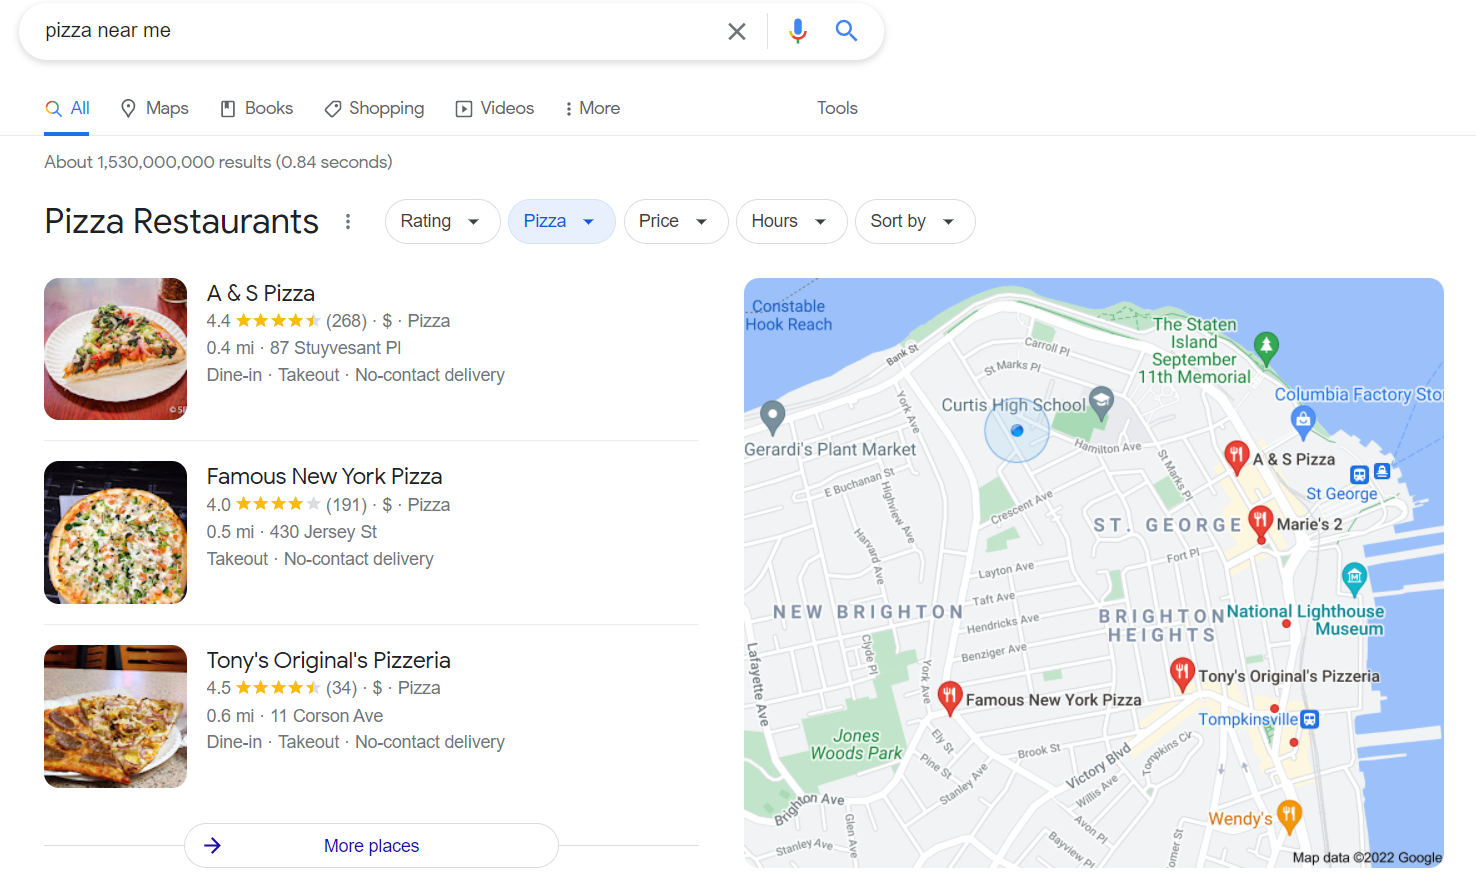 Screen capture of Google search results for "pizza near me" for the geographic location of Brooklyn, NY